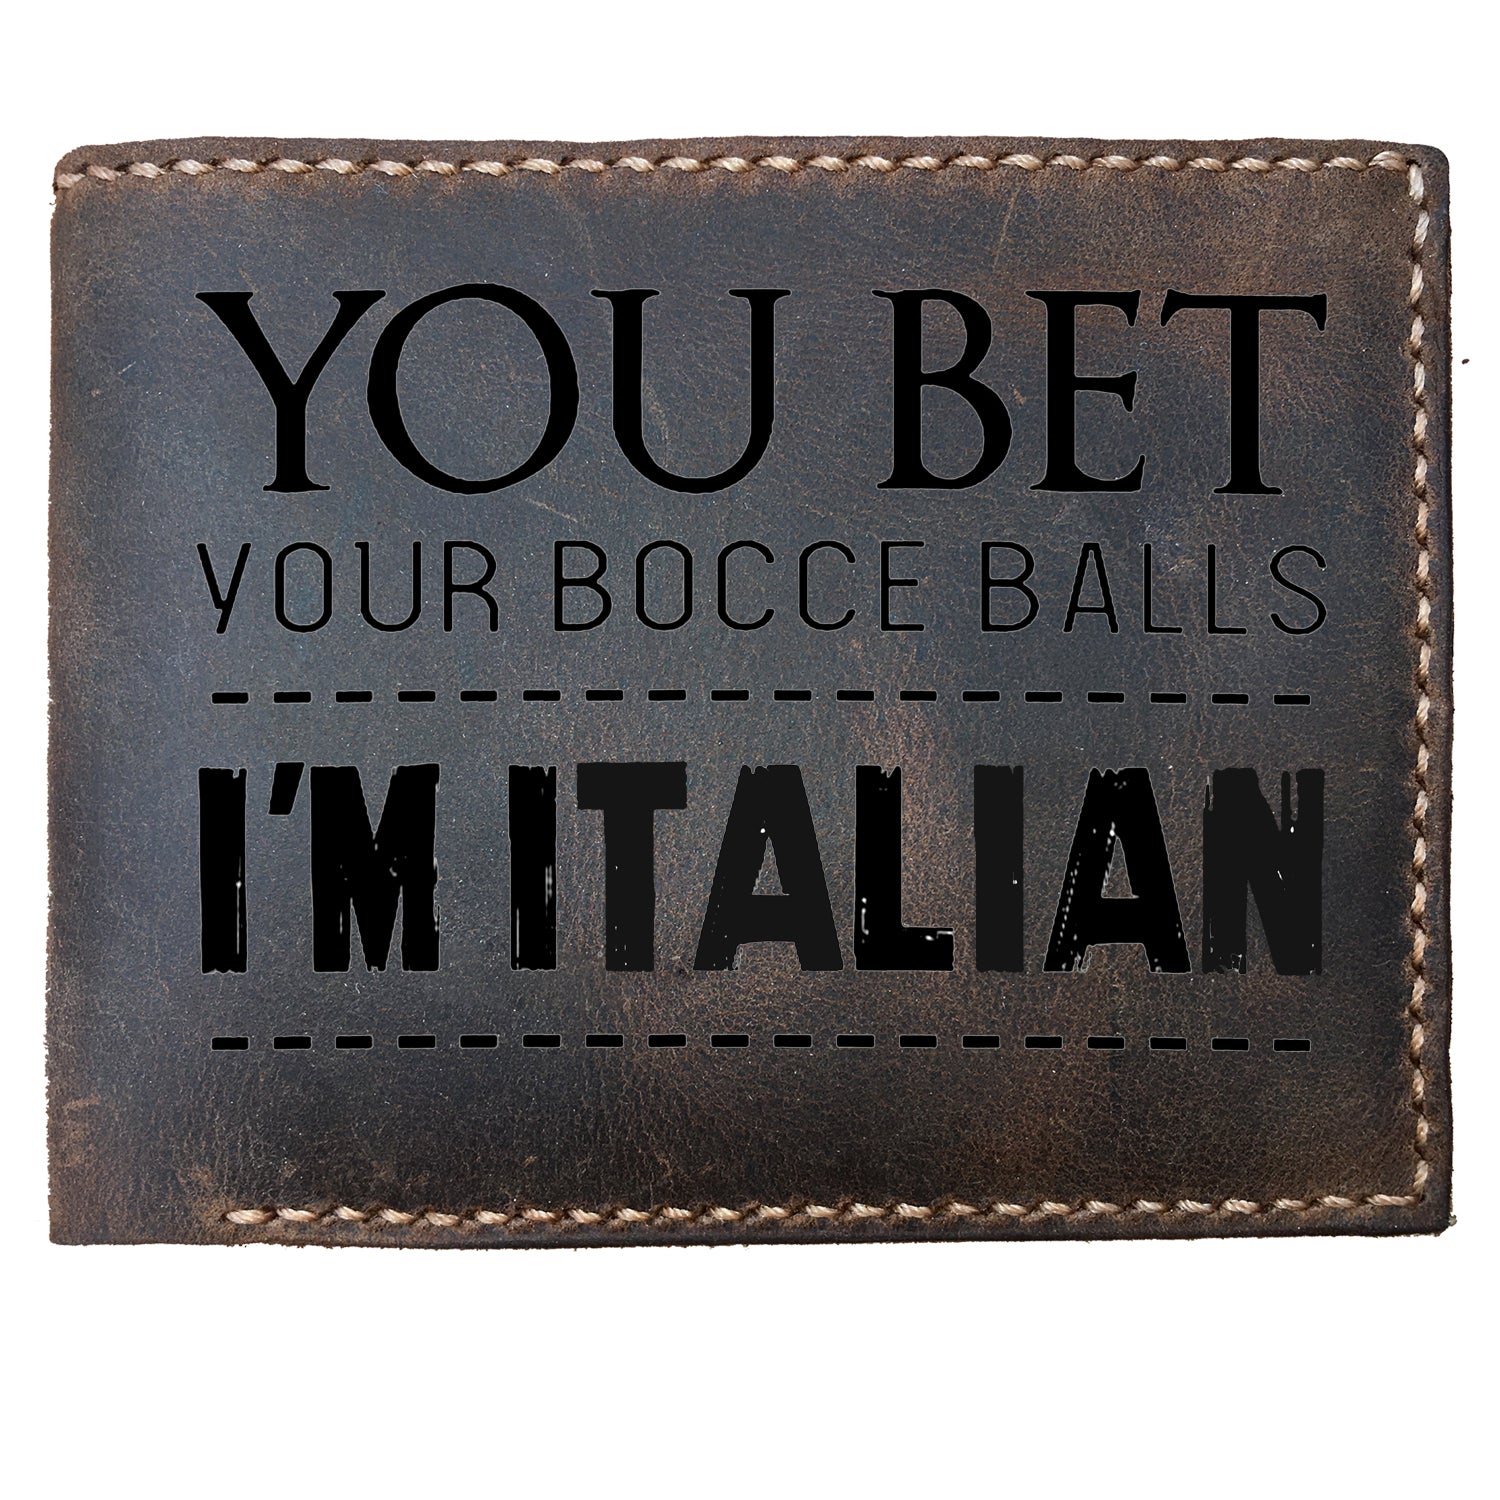 Funny Skitongifts Custom Laser Engraved Bifold Leather Wallet For Men, You Bet Your Bocce Balls I'm Italian